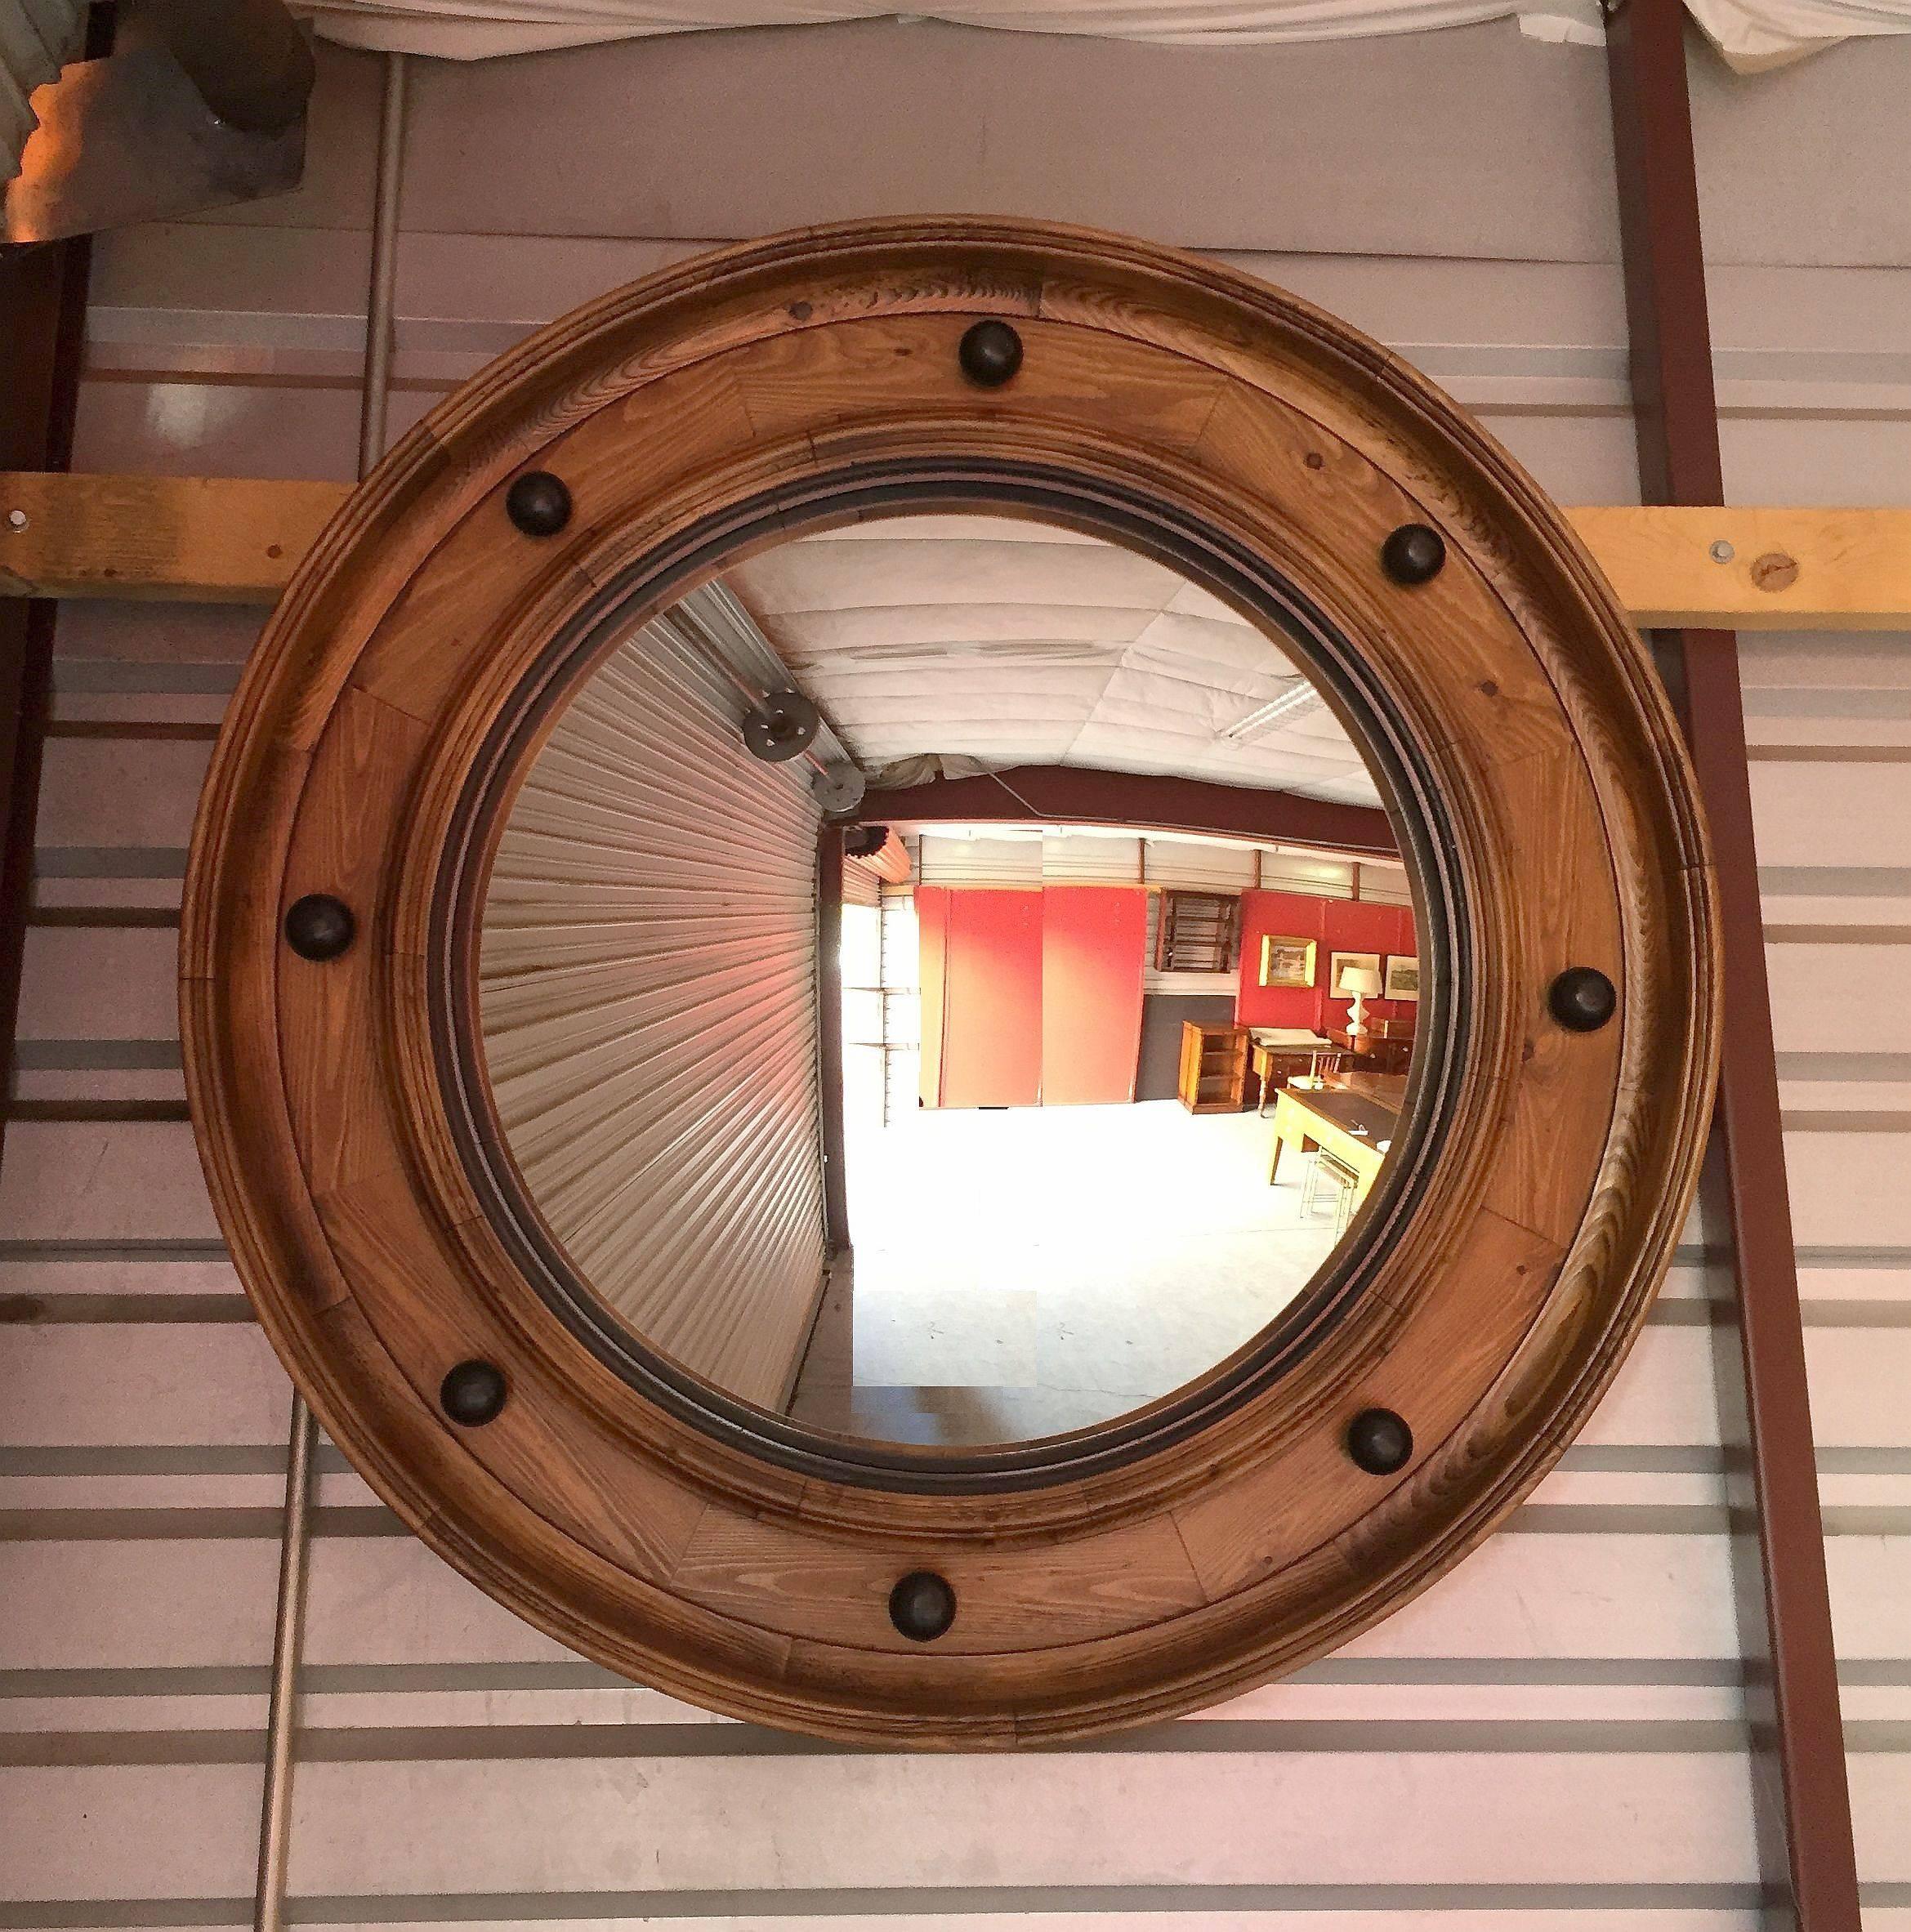 A large English convex mirror (42" diameter) featuring a toned, moulded wood frame with black accents.